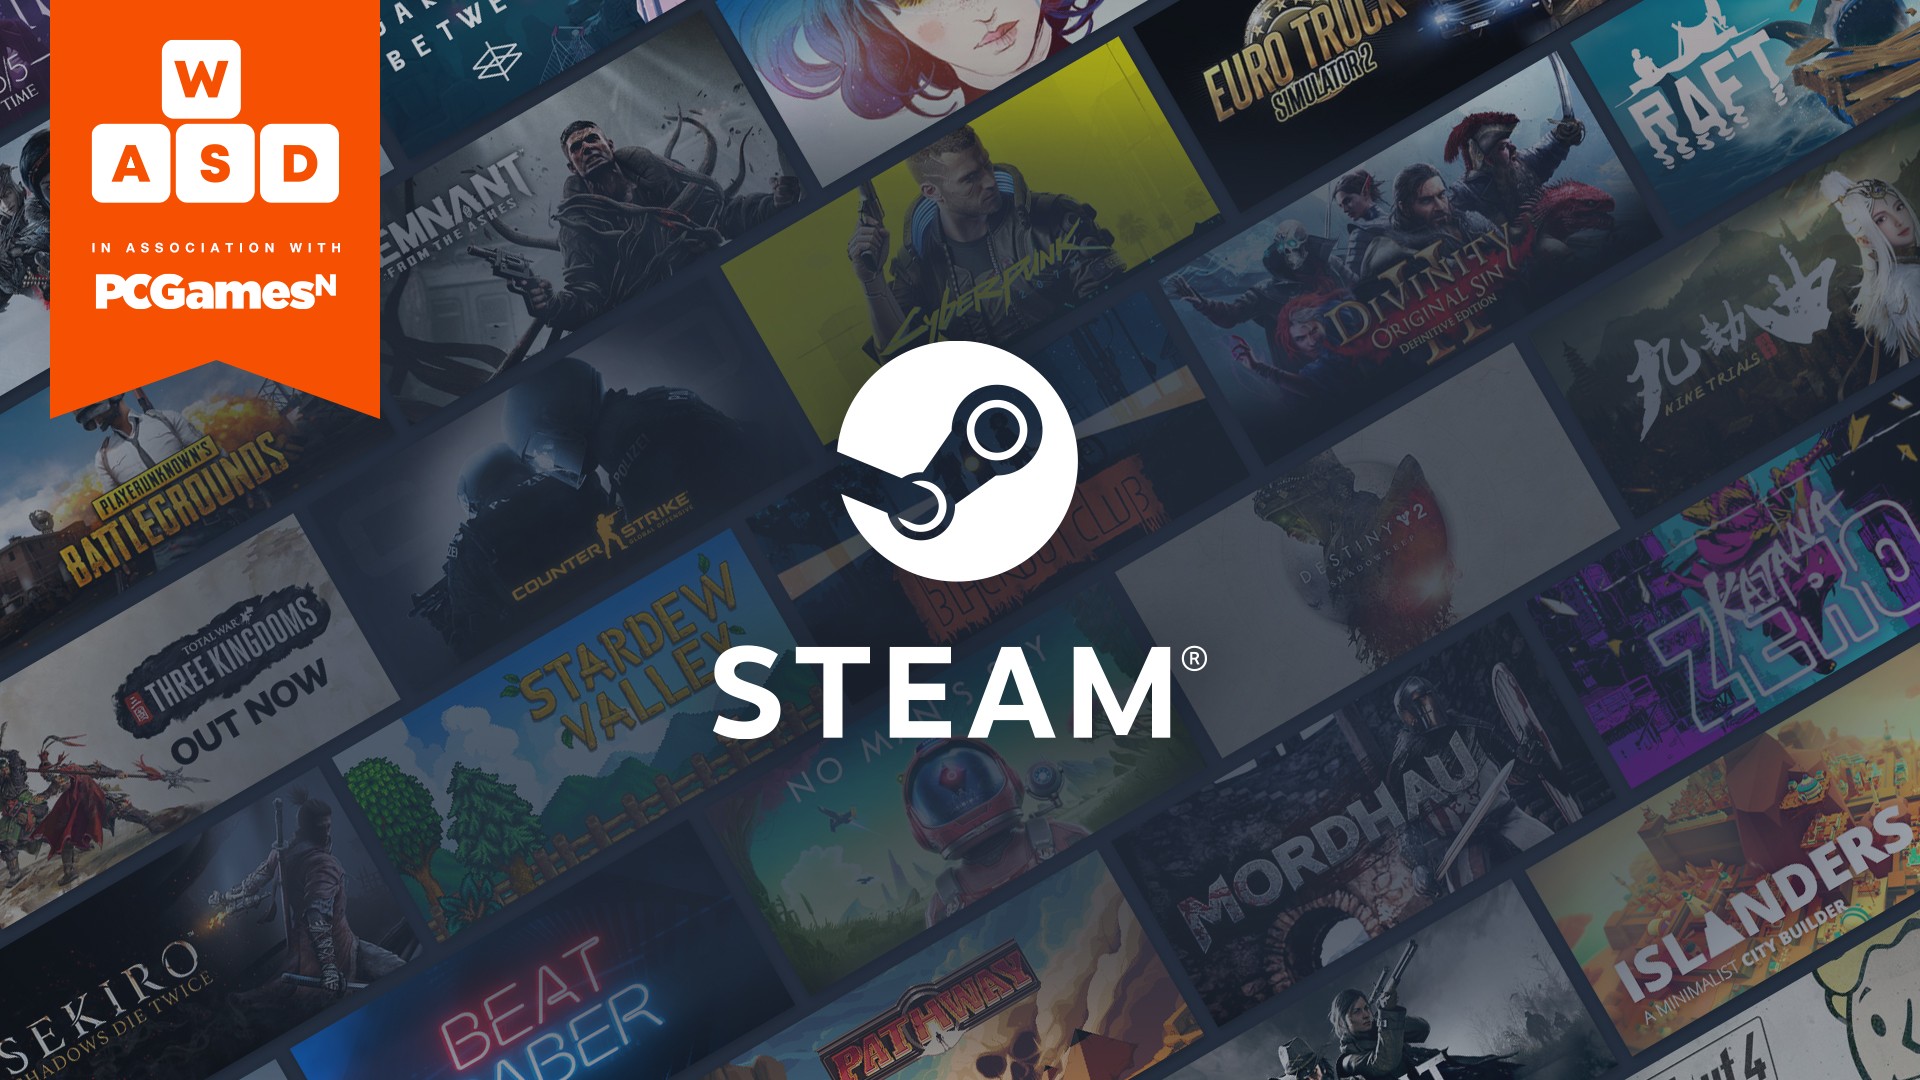 Here's how to get your indie game noticed on Steam